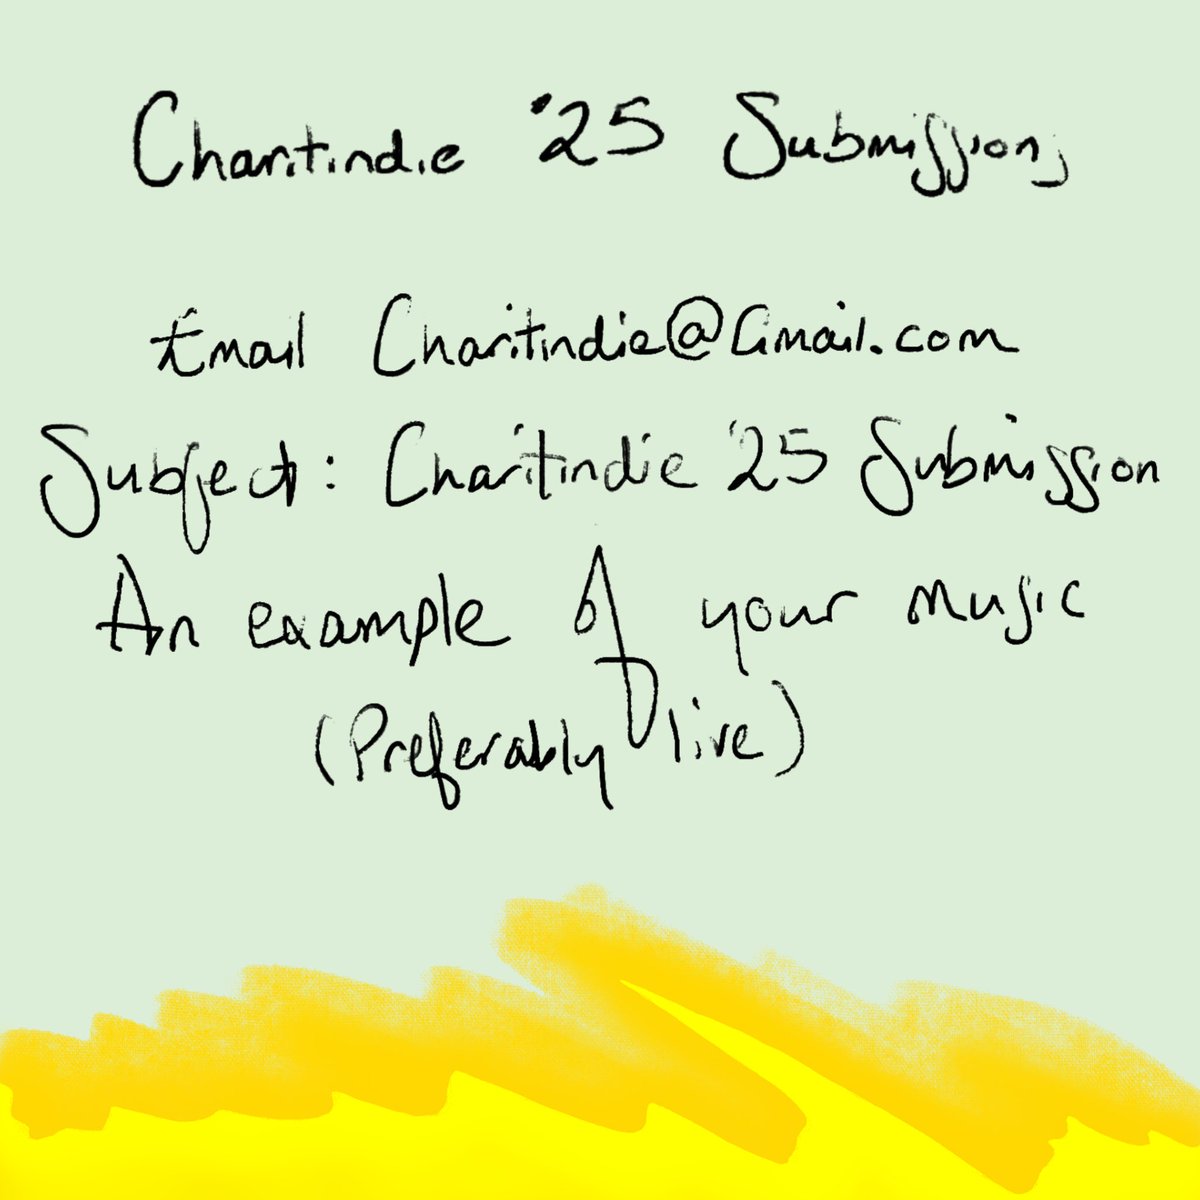 would YOU like to take part in charitindie? here's how!